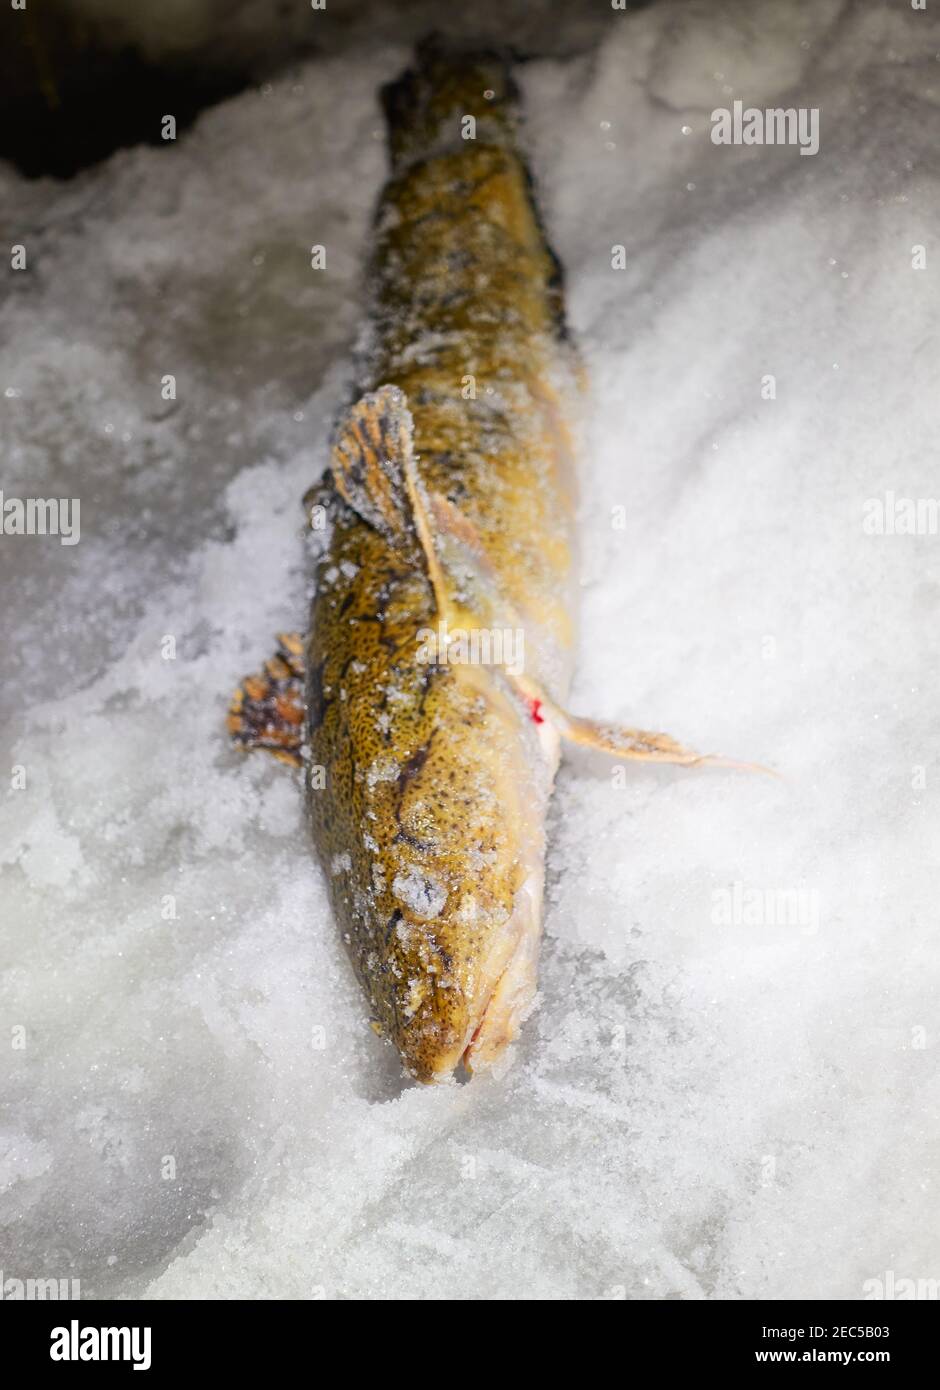 https://c8.alamy.com/comp/2EC5B03/newly-catch-burbot-on-ice-caught-by-ice-fishing-in-extremely-cold-conditions-in-the-middle-of-the-night-in-finland-in-february-2021-2EC5B03.jpg